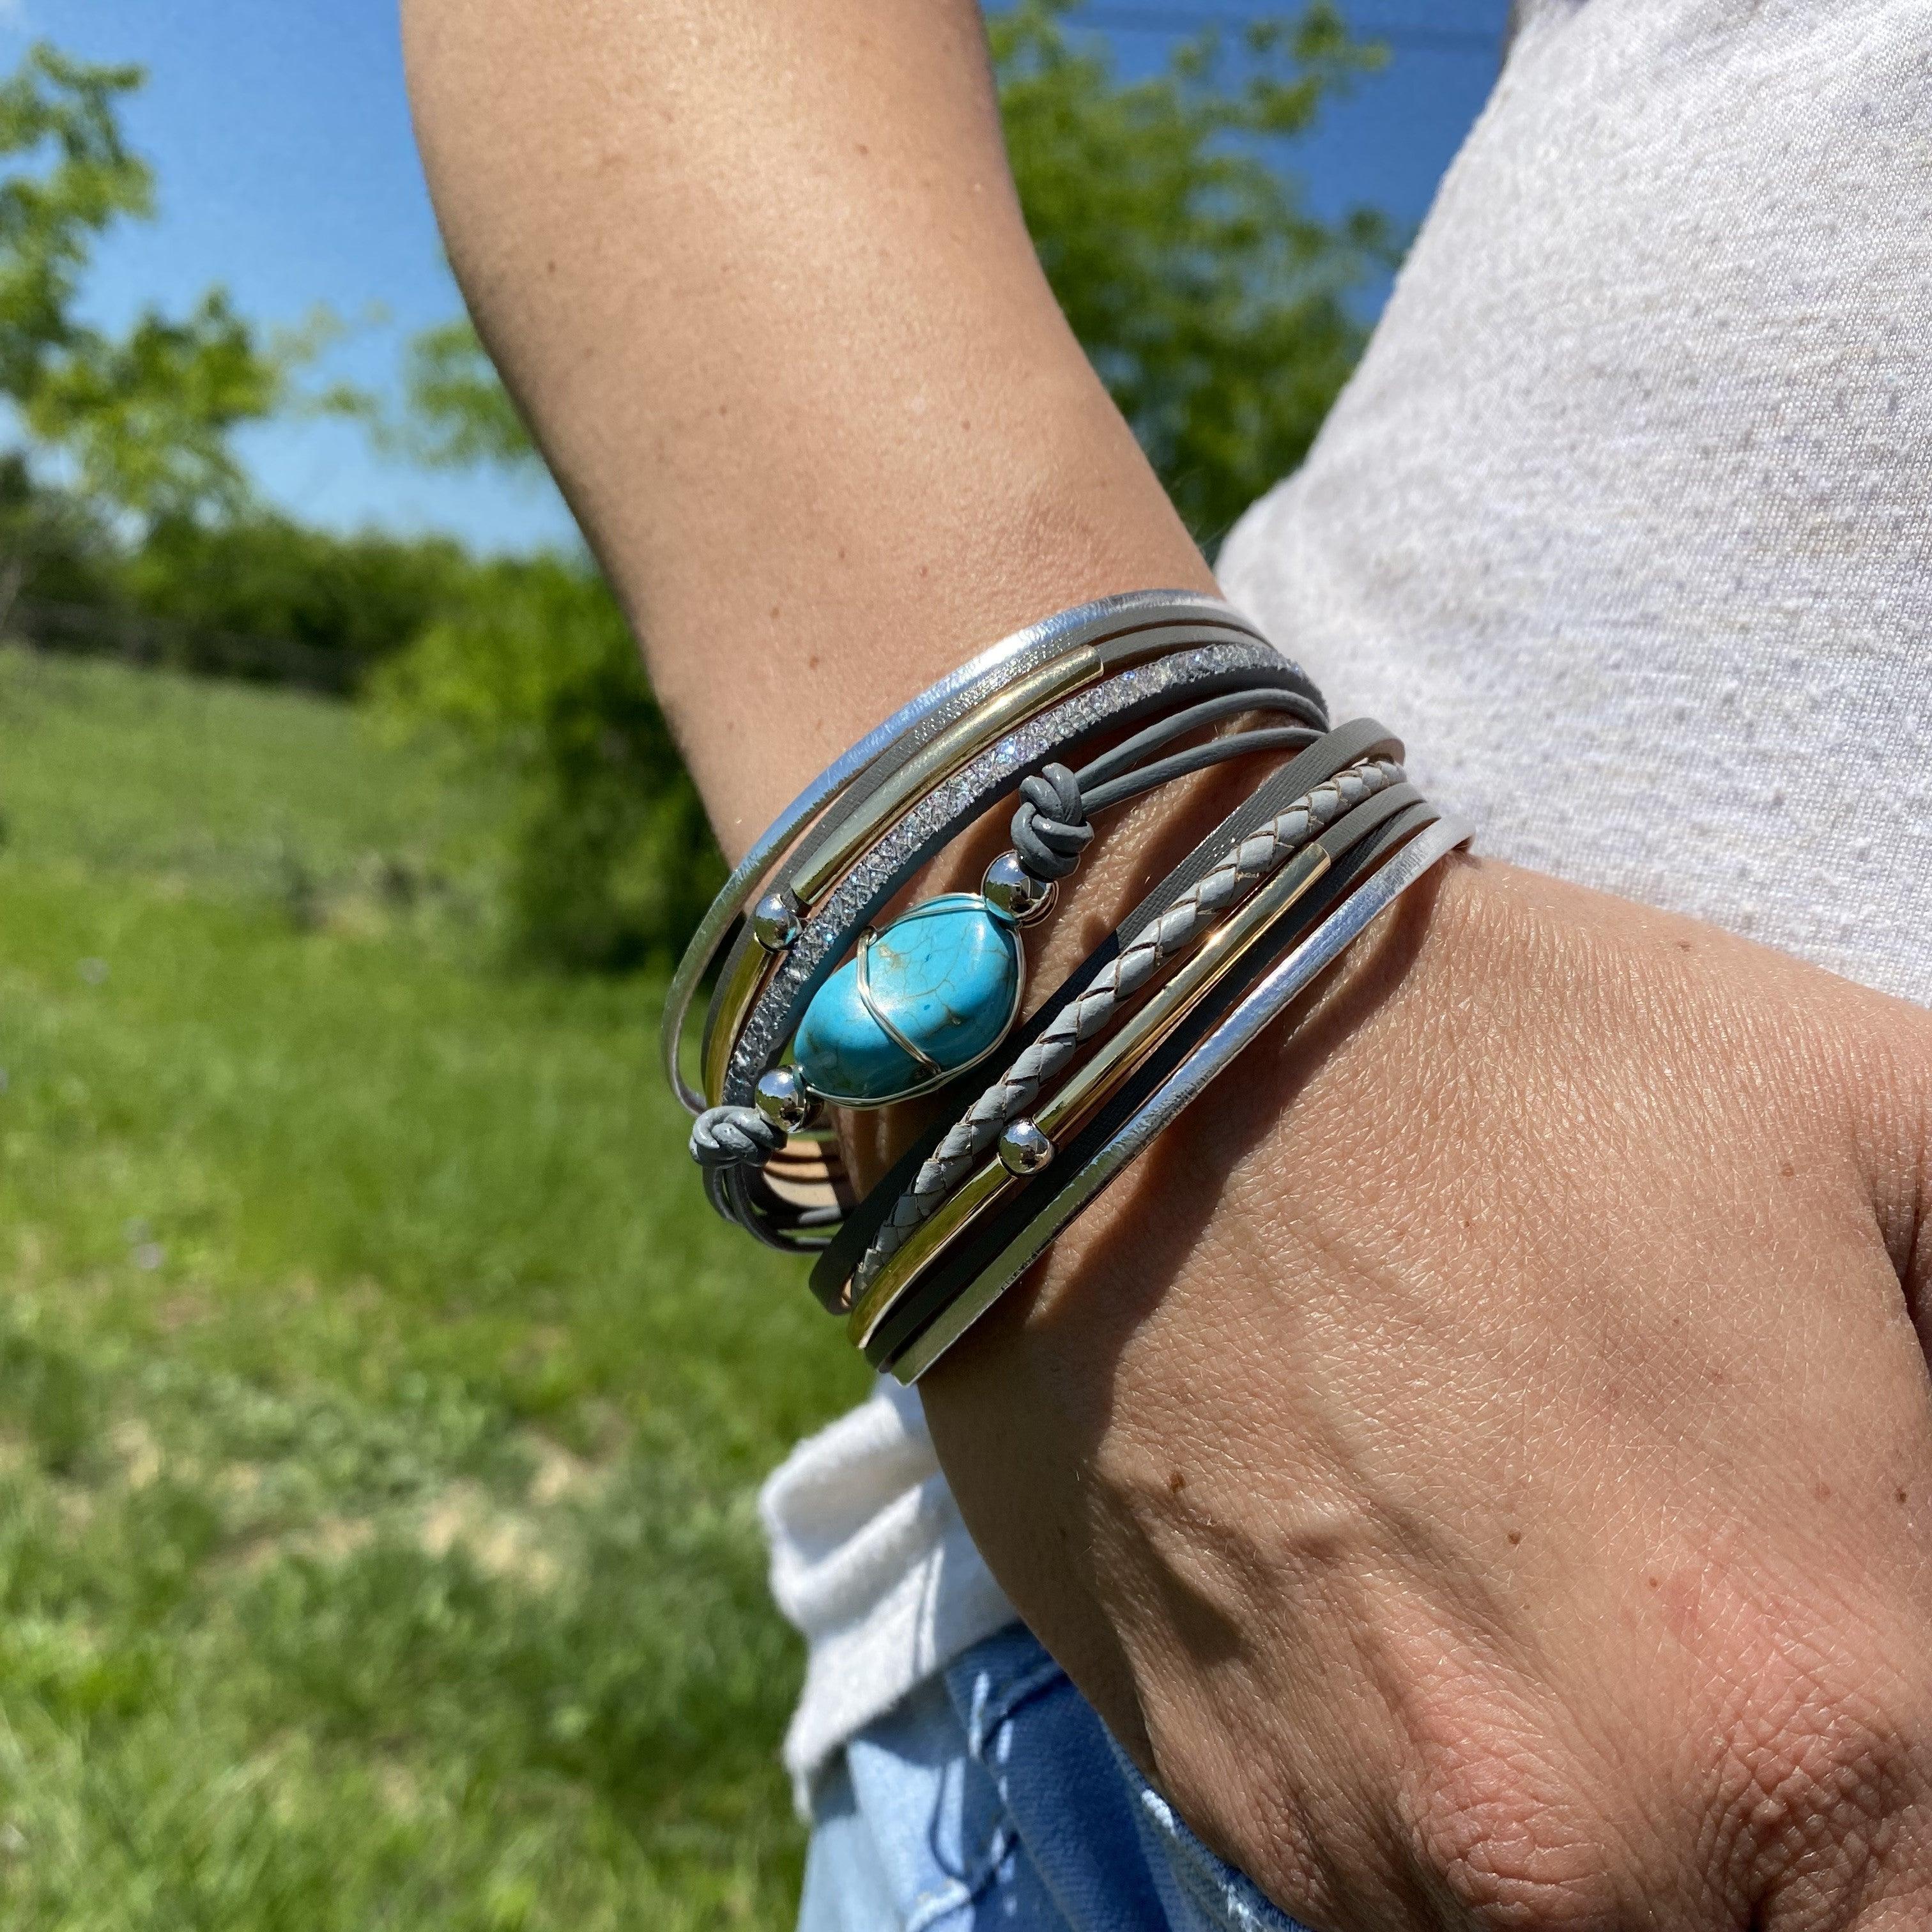 Grey Leather and Turquoise Stone Fashion Bracelet XI117 - RODEO DRIVE